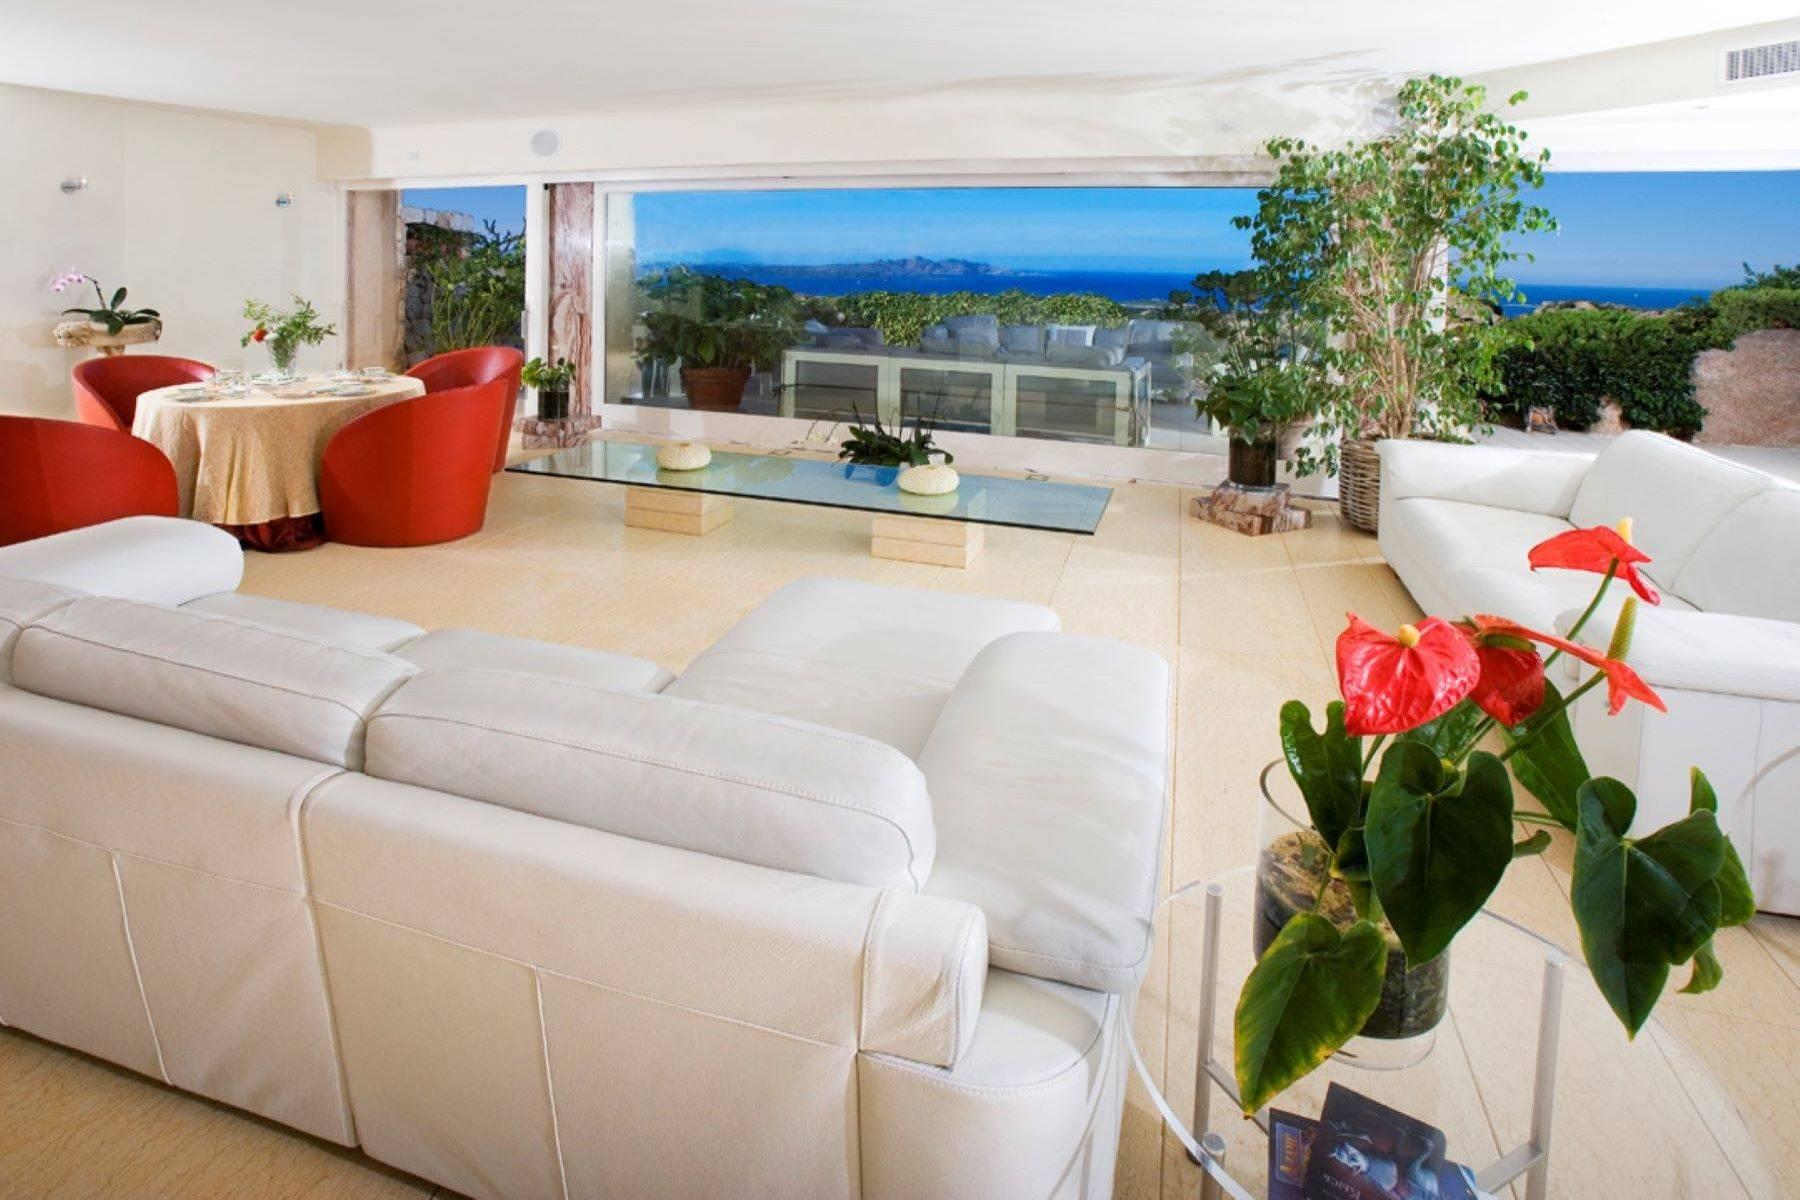 Exclusive property with stunning sea views overlooking the Costa Smeralda - 7